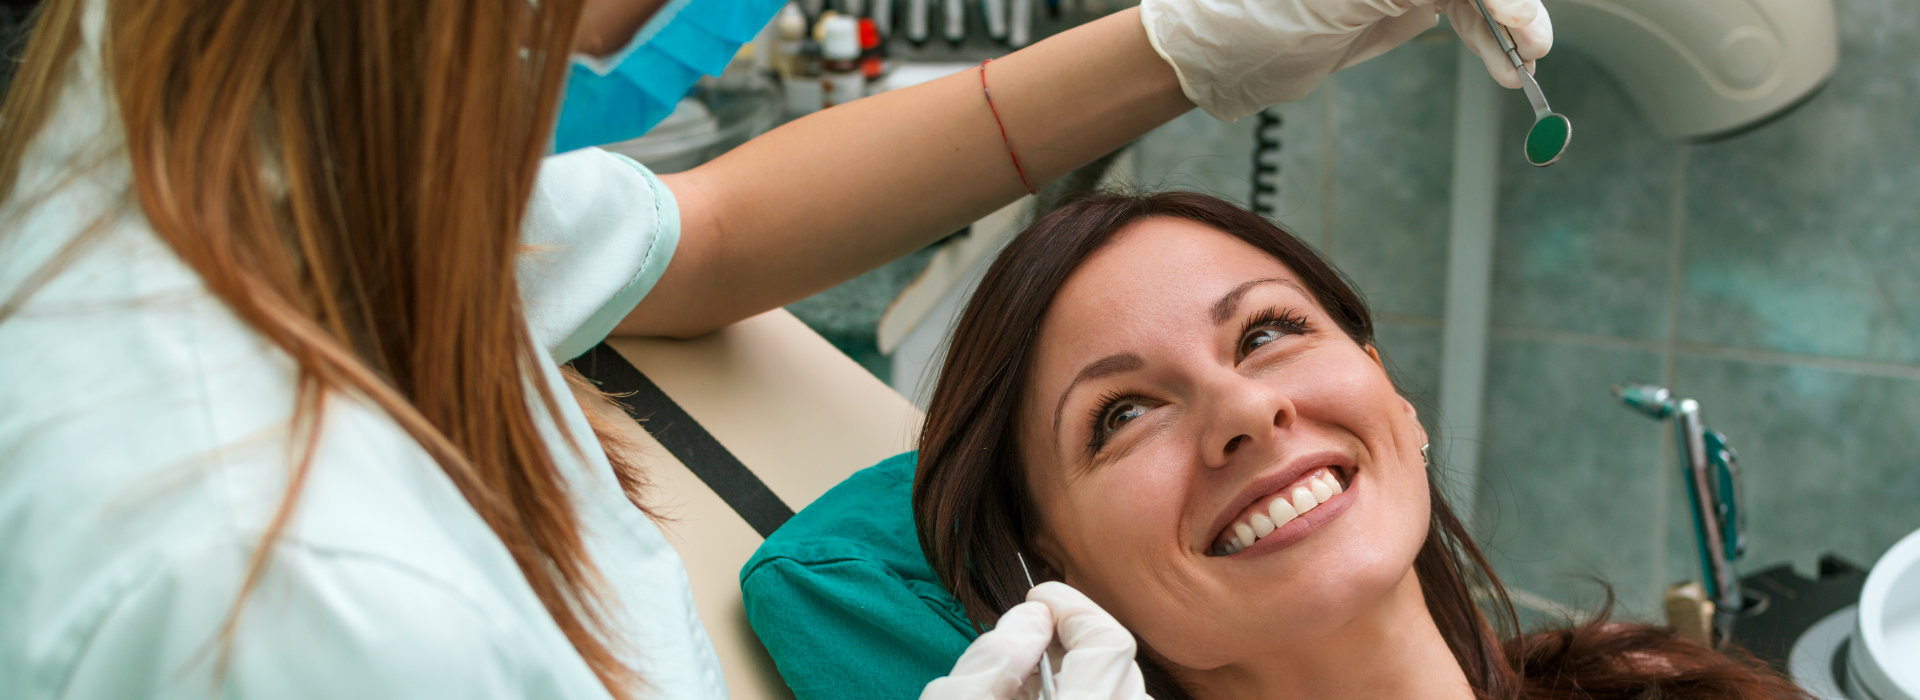 A woman is smiling after receiving extractions & preservation treatments.